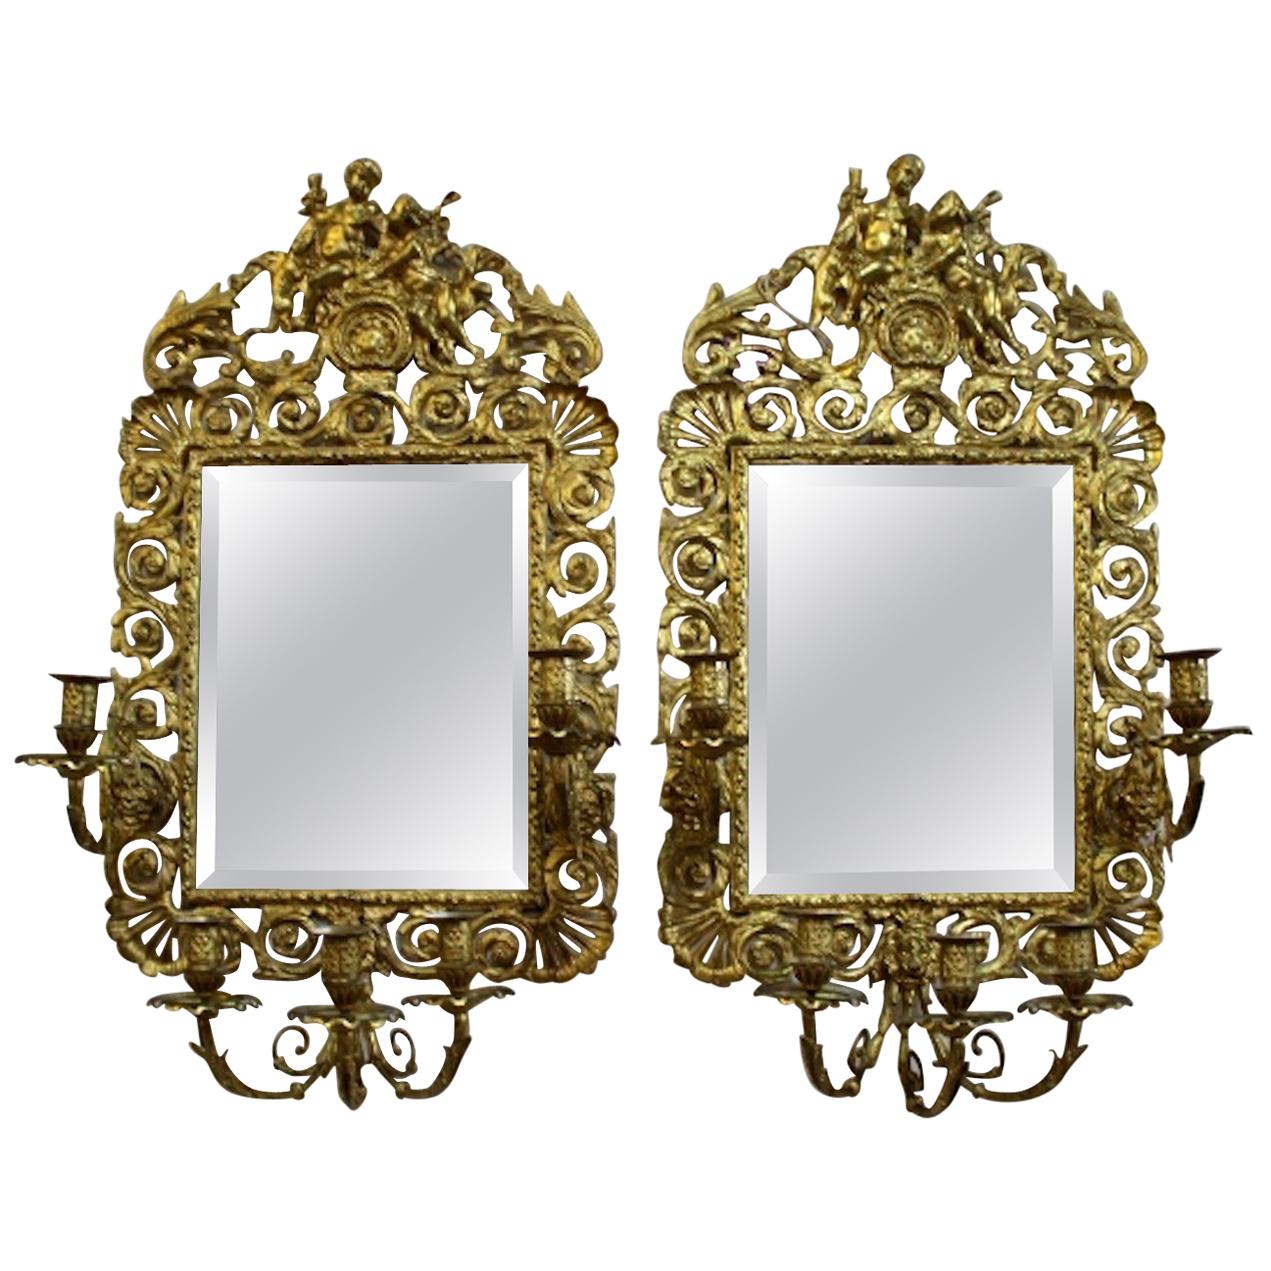 Pair of French Louis XVI Style Gilt Bronze and Mirrored Sconces